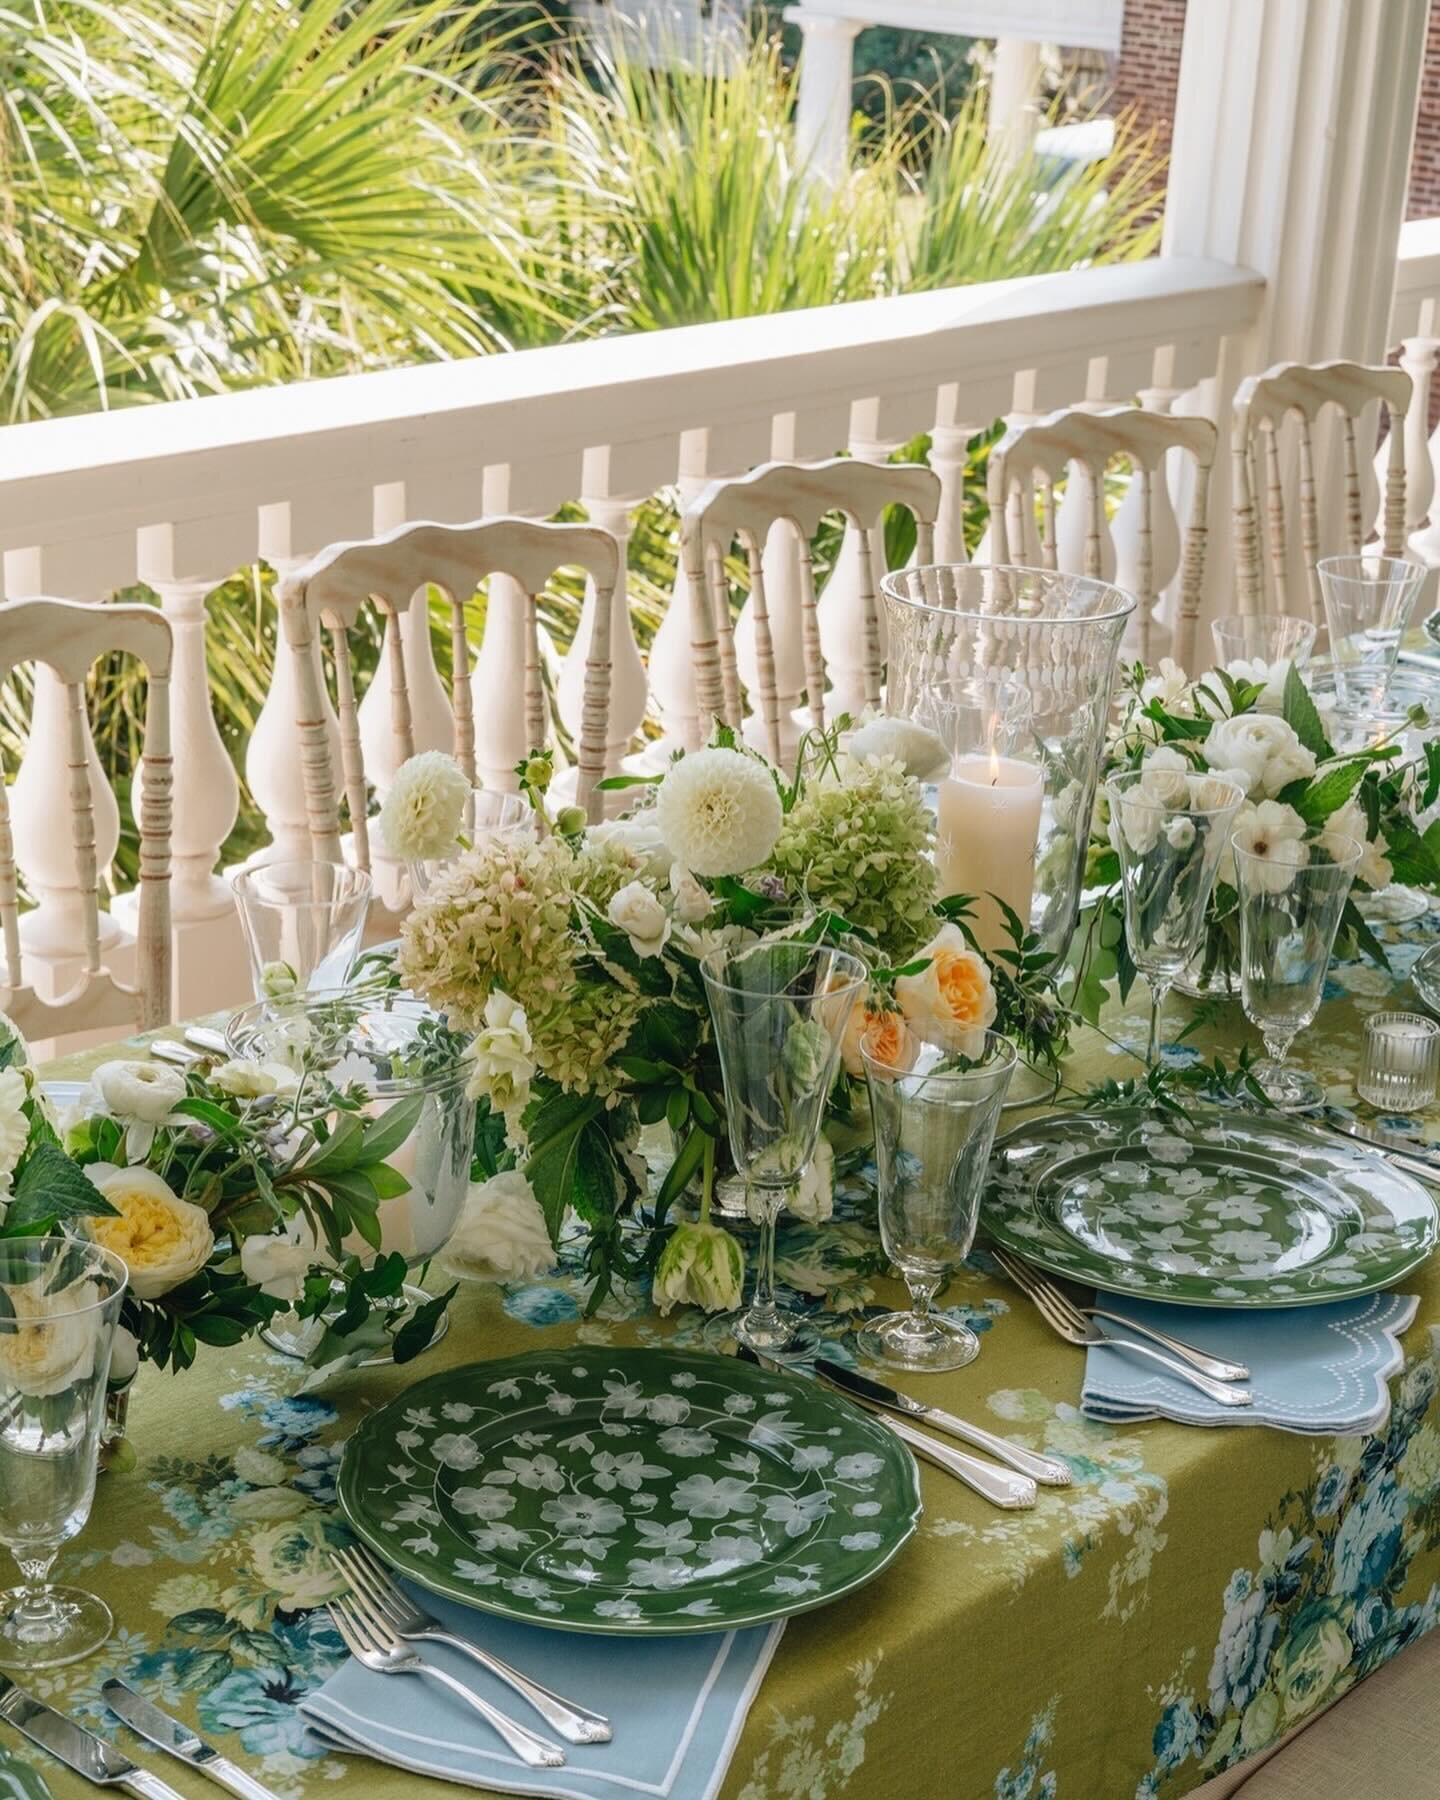 Green is for garden parties. Celebrating all things green, especially this St. Patrick&rsquo;s Day 🍀
⠀⠀⠀⠀⠀⠀⠀⠀⠀
Linens: @shoptheavenue
Florals: @sygdesigns
Plates: @ginori1735
Napkins: @mrsaliceshop
Candlelight: @ellieproctorantiques 
Candlesticks: @